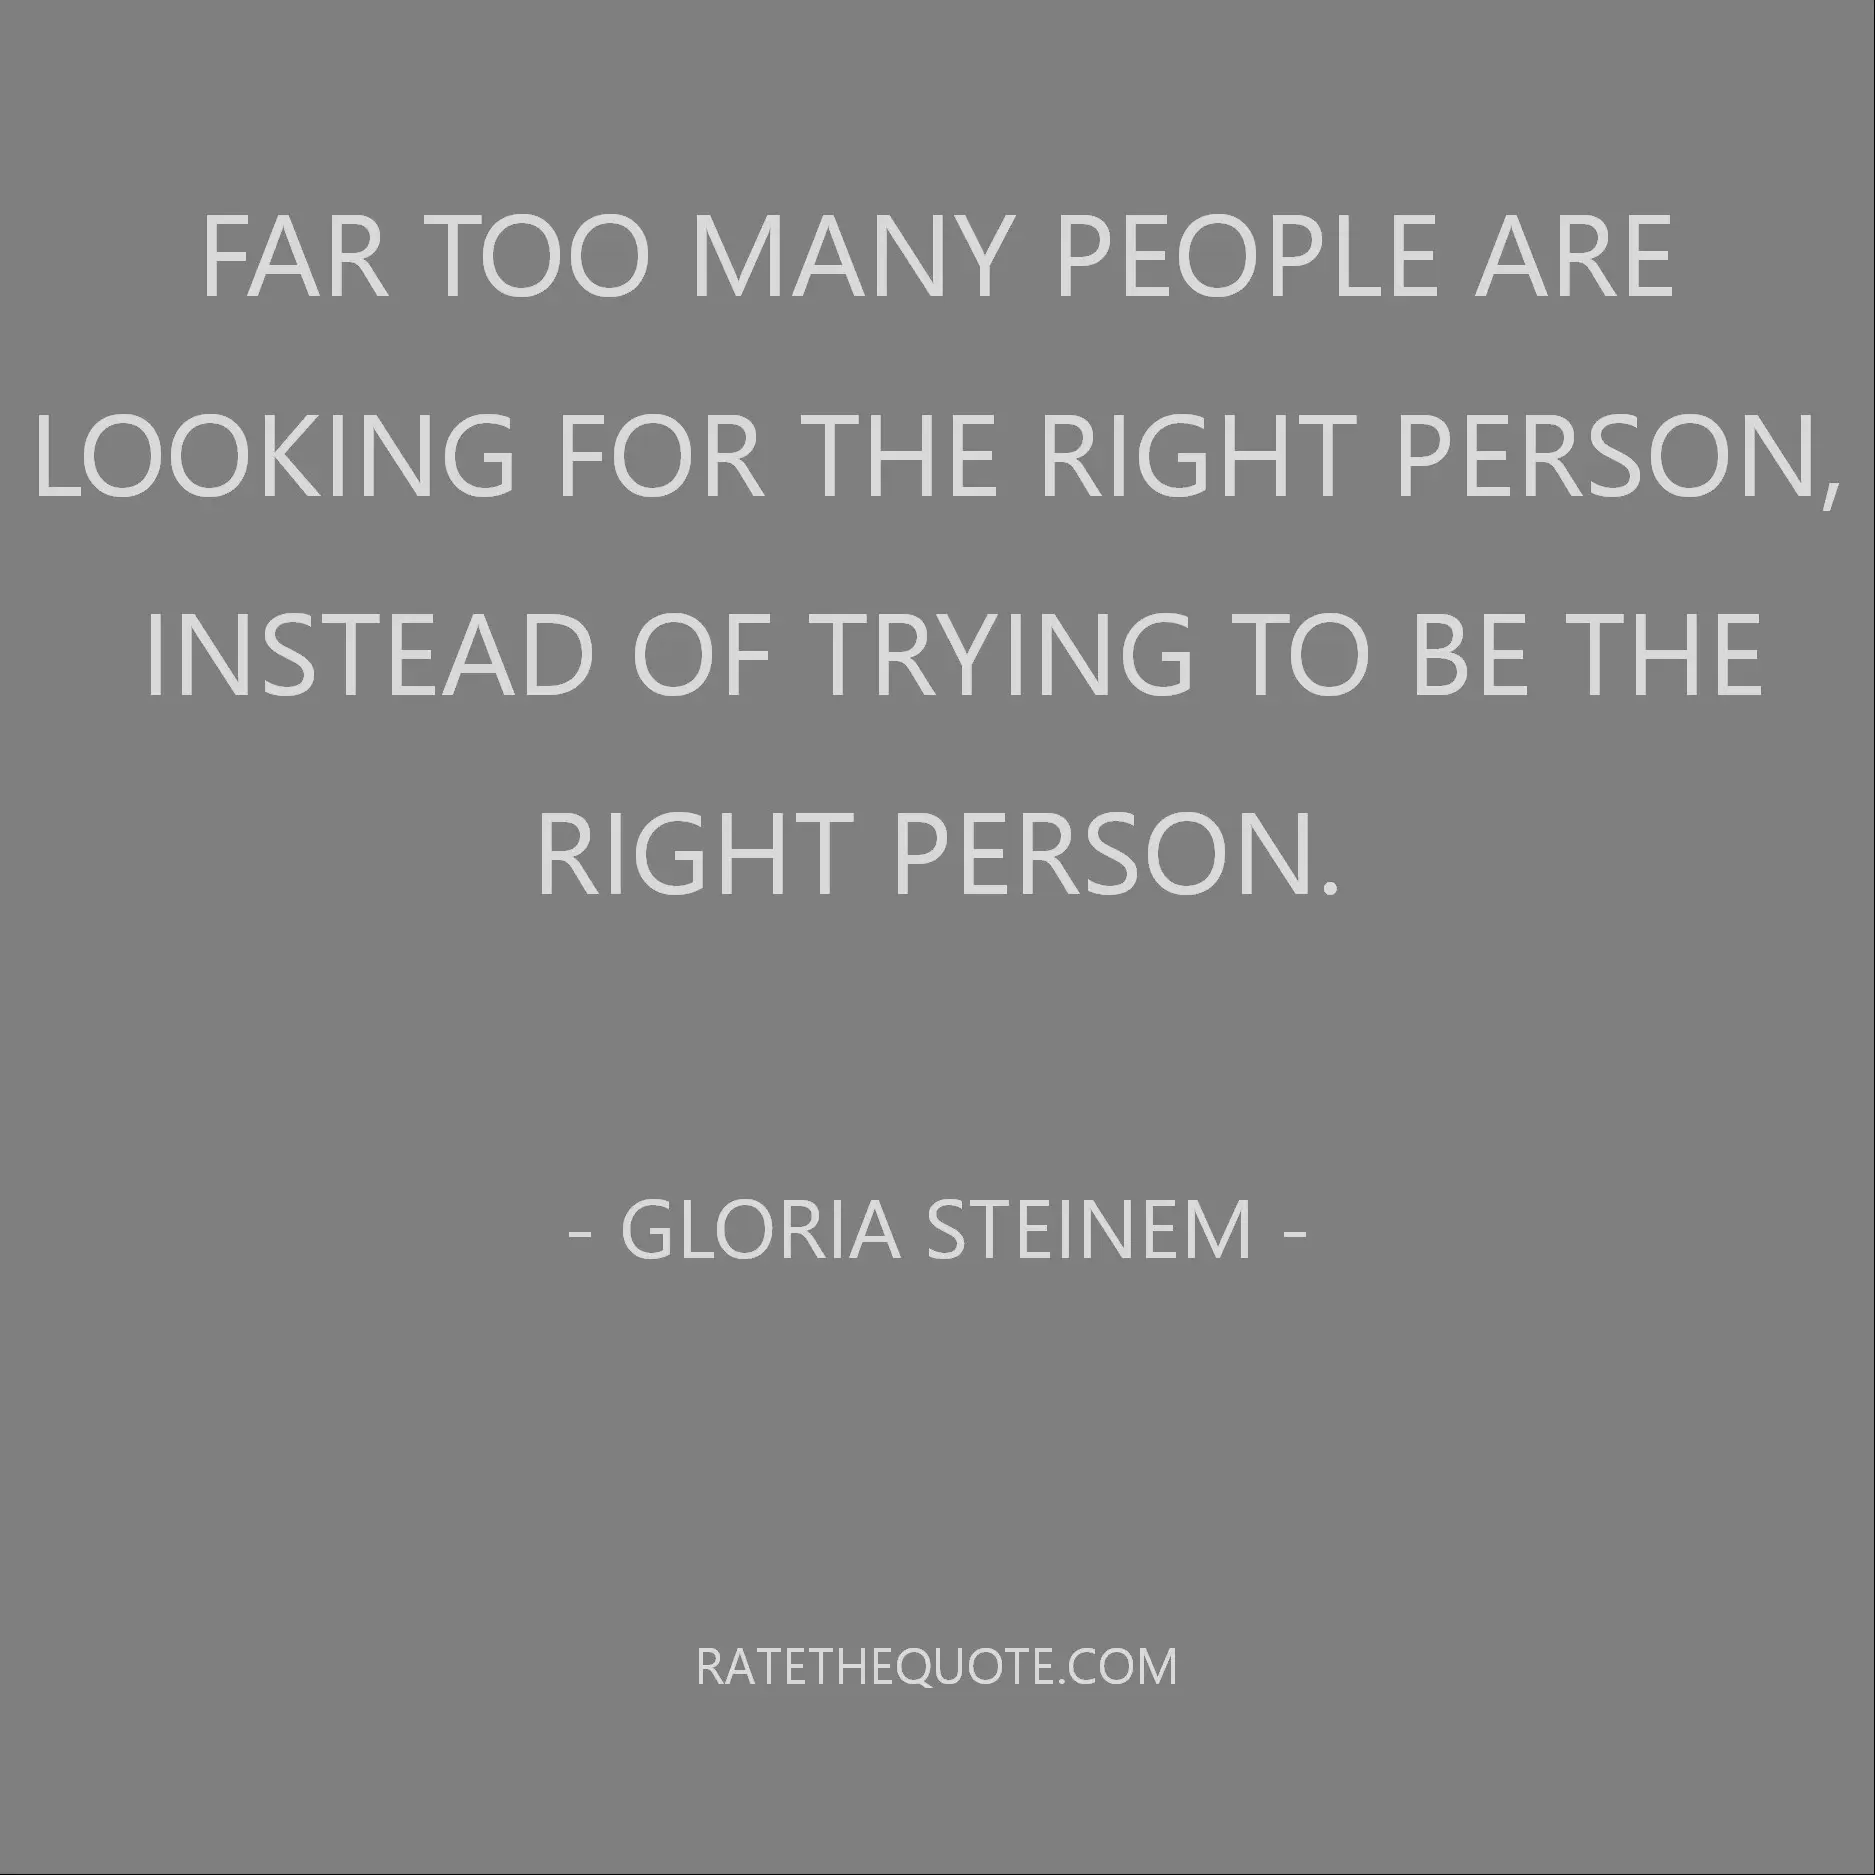 Far too many people are looking for the right person, instead of trying to be the right person. – Gloria Steinem